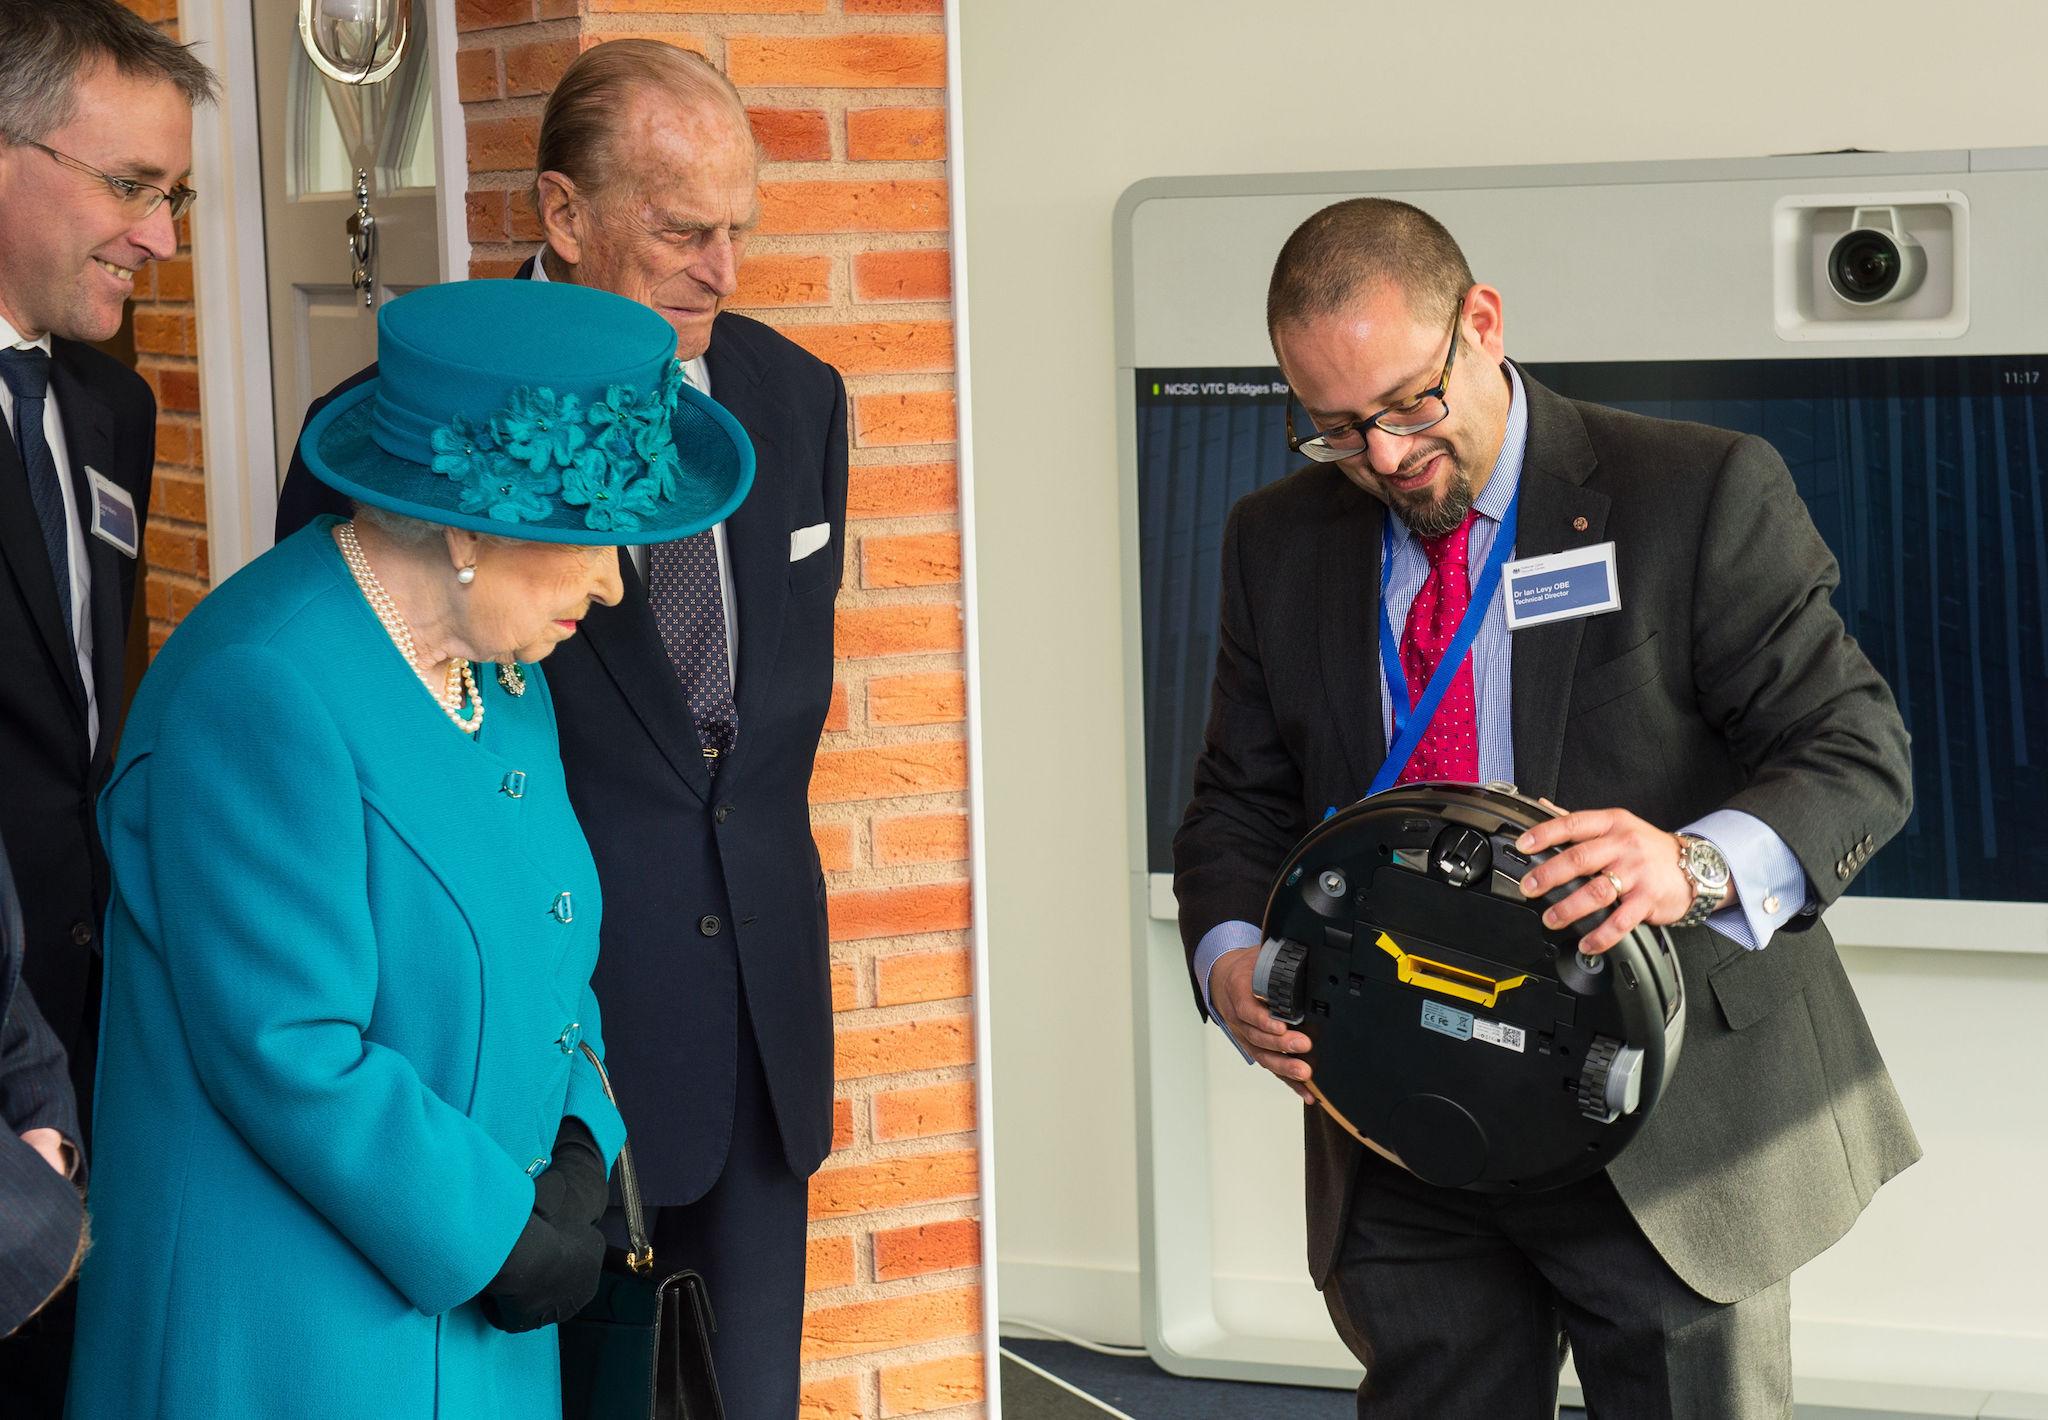 Dr Ian Levy shows the Queen and the Duke of Edinburgh a robot vacuum cleaner which could be vulnerable to cyber attack